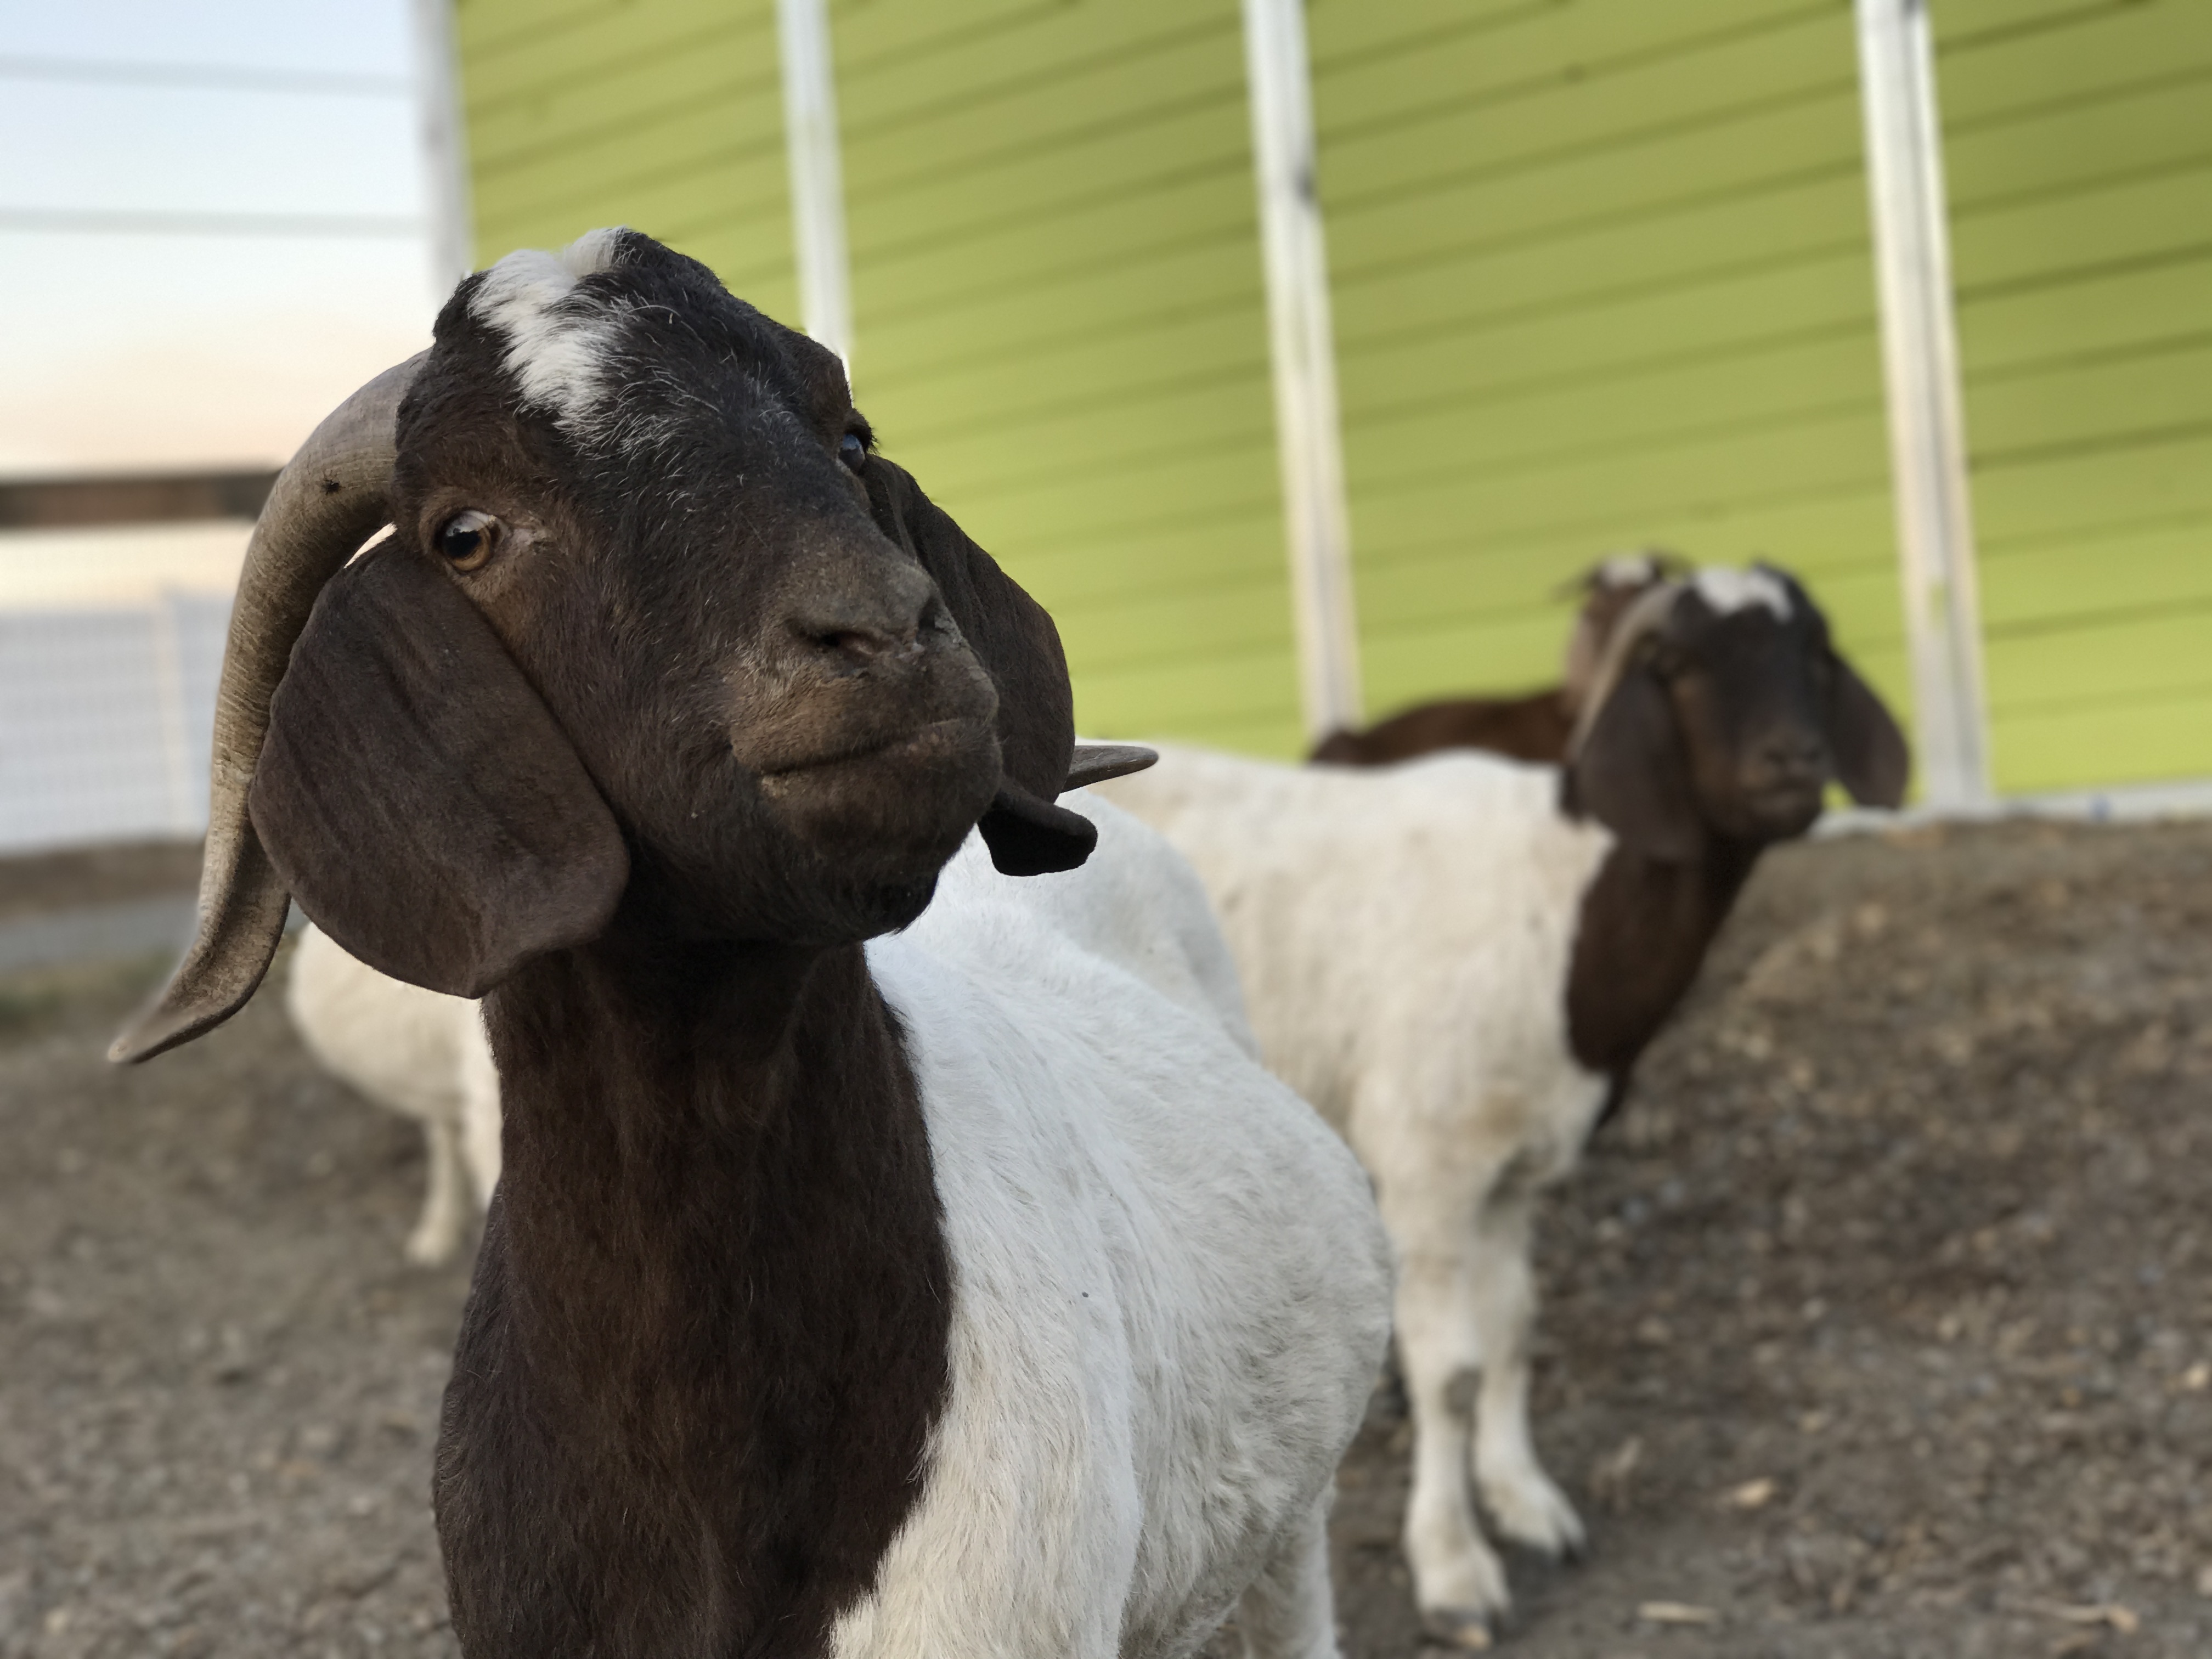 Goats rescued from evacuation areas stand at the Goatlandia animal sanctuary in Santa Rosa. (Photo by Alex Eckhart)